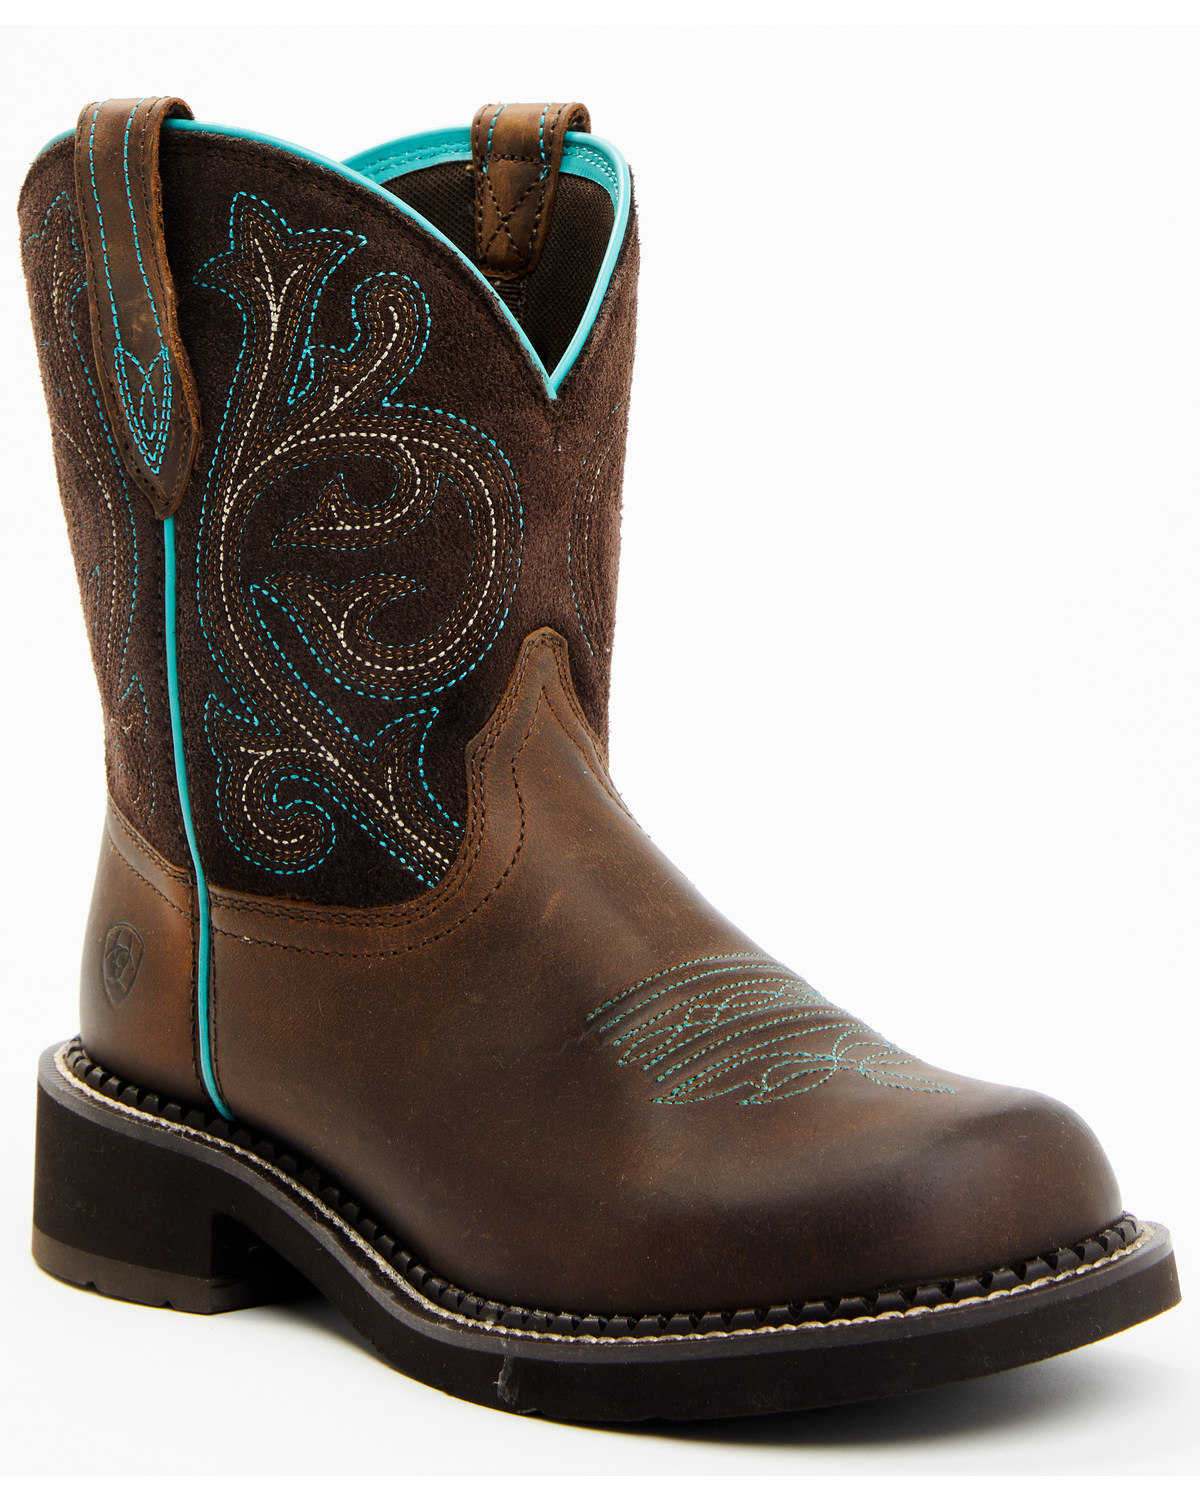 Ariat Fatbaby Women's Heritage Western Performance Boots - Round Toe